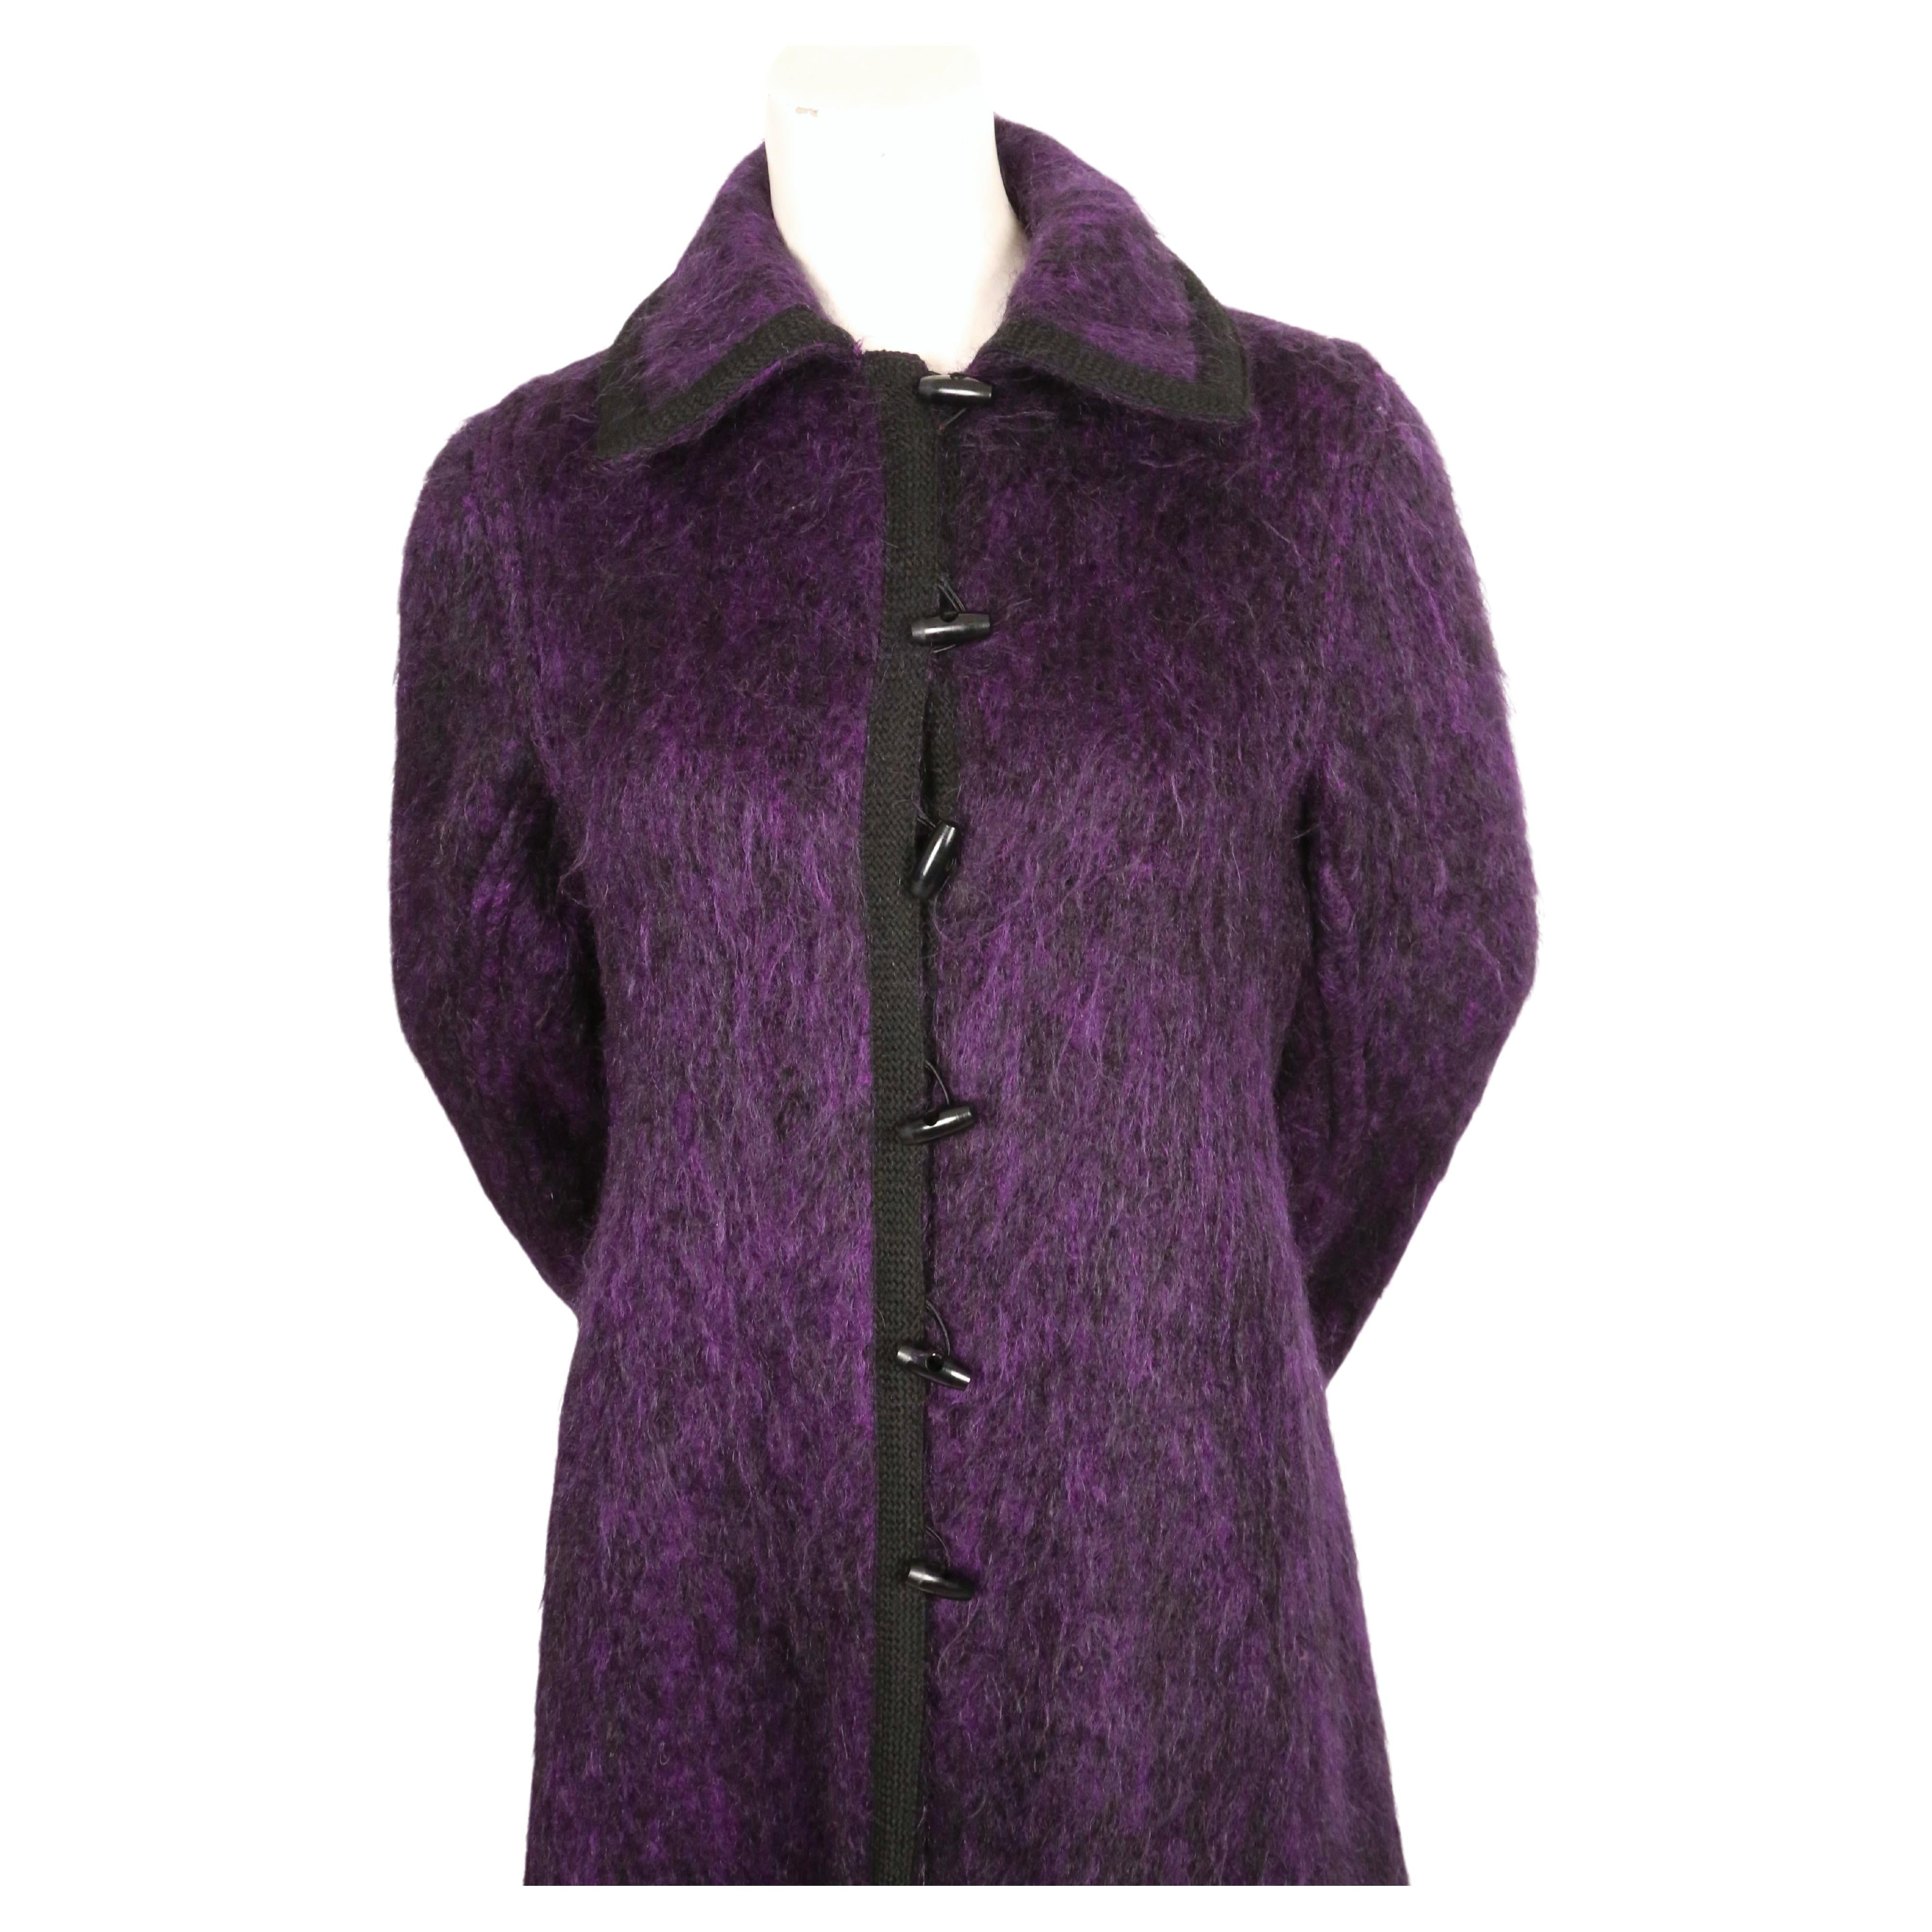 Women's or Men's 1960's YVES SAINT LAURENT violet purple brushed wool coat with braided trim For Sale